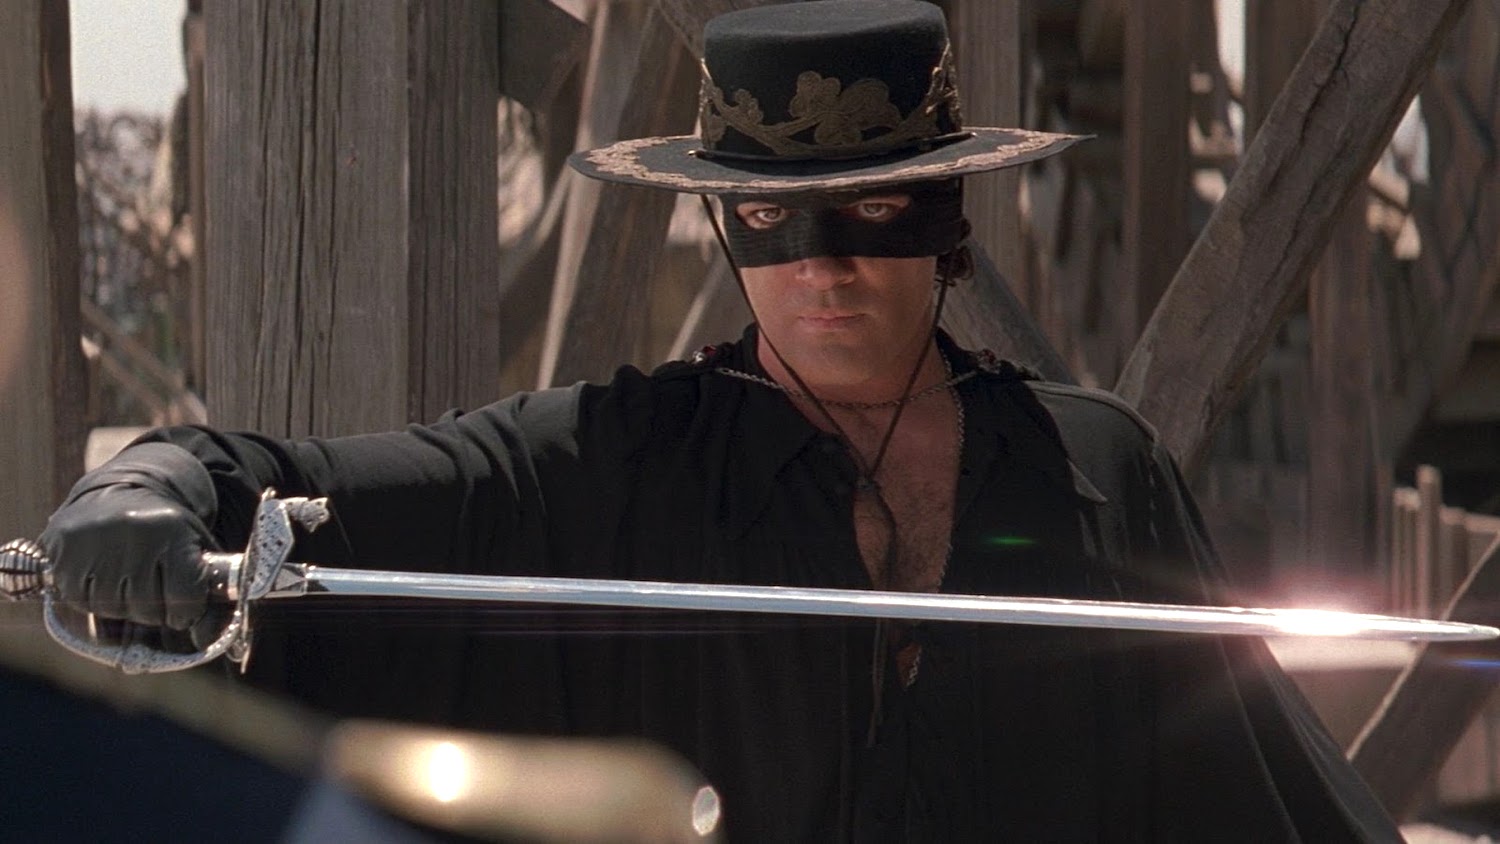 How The Mask of Zorro Revealed the Real History Behind the Legend